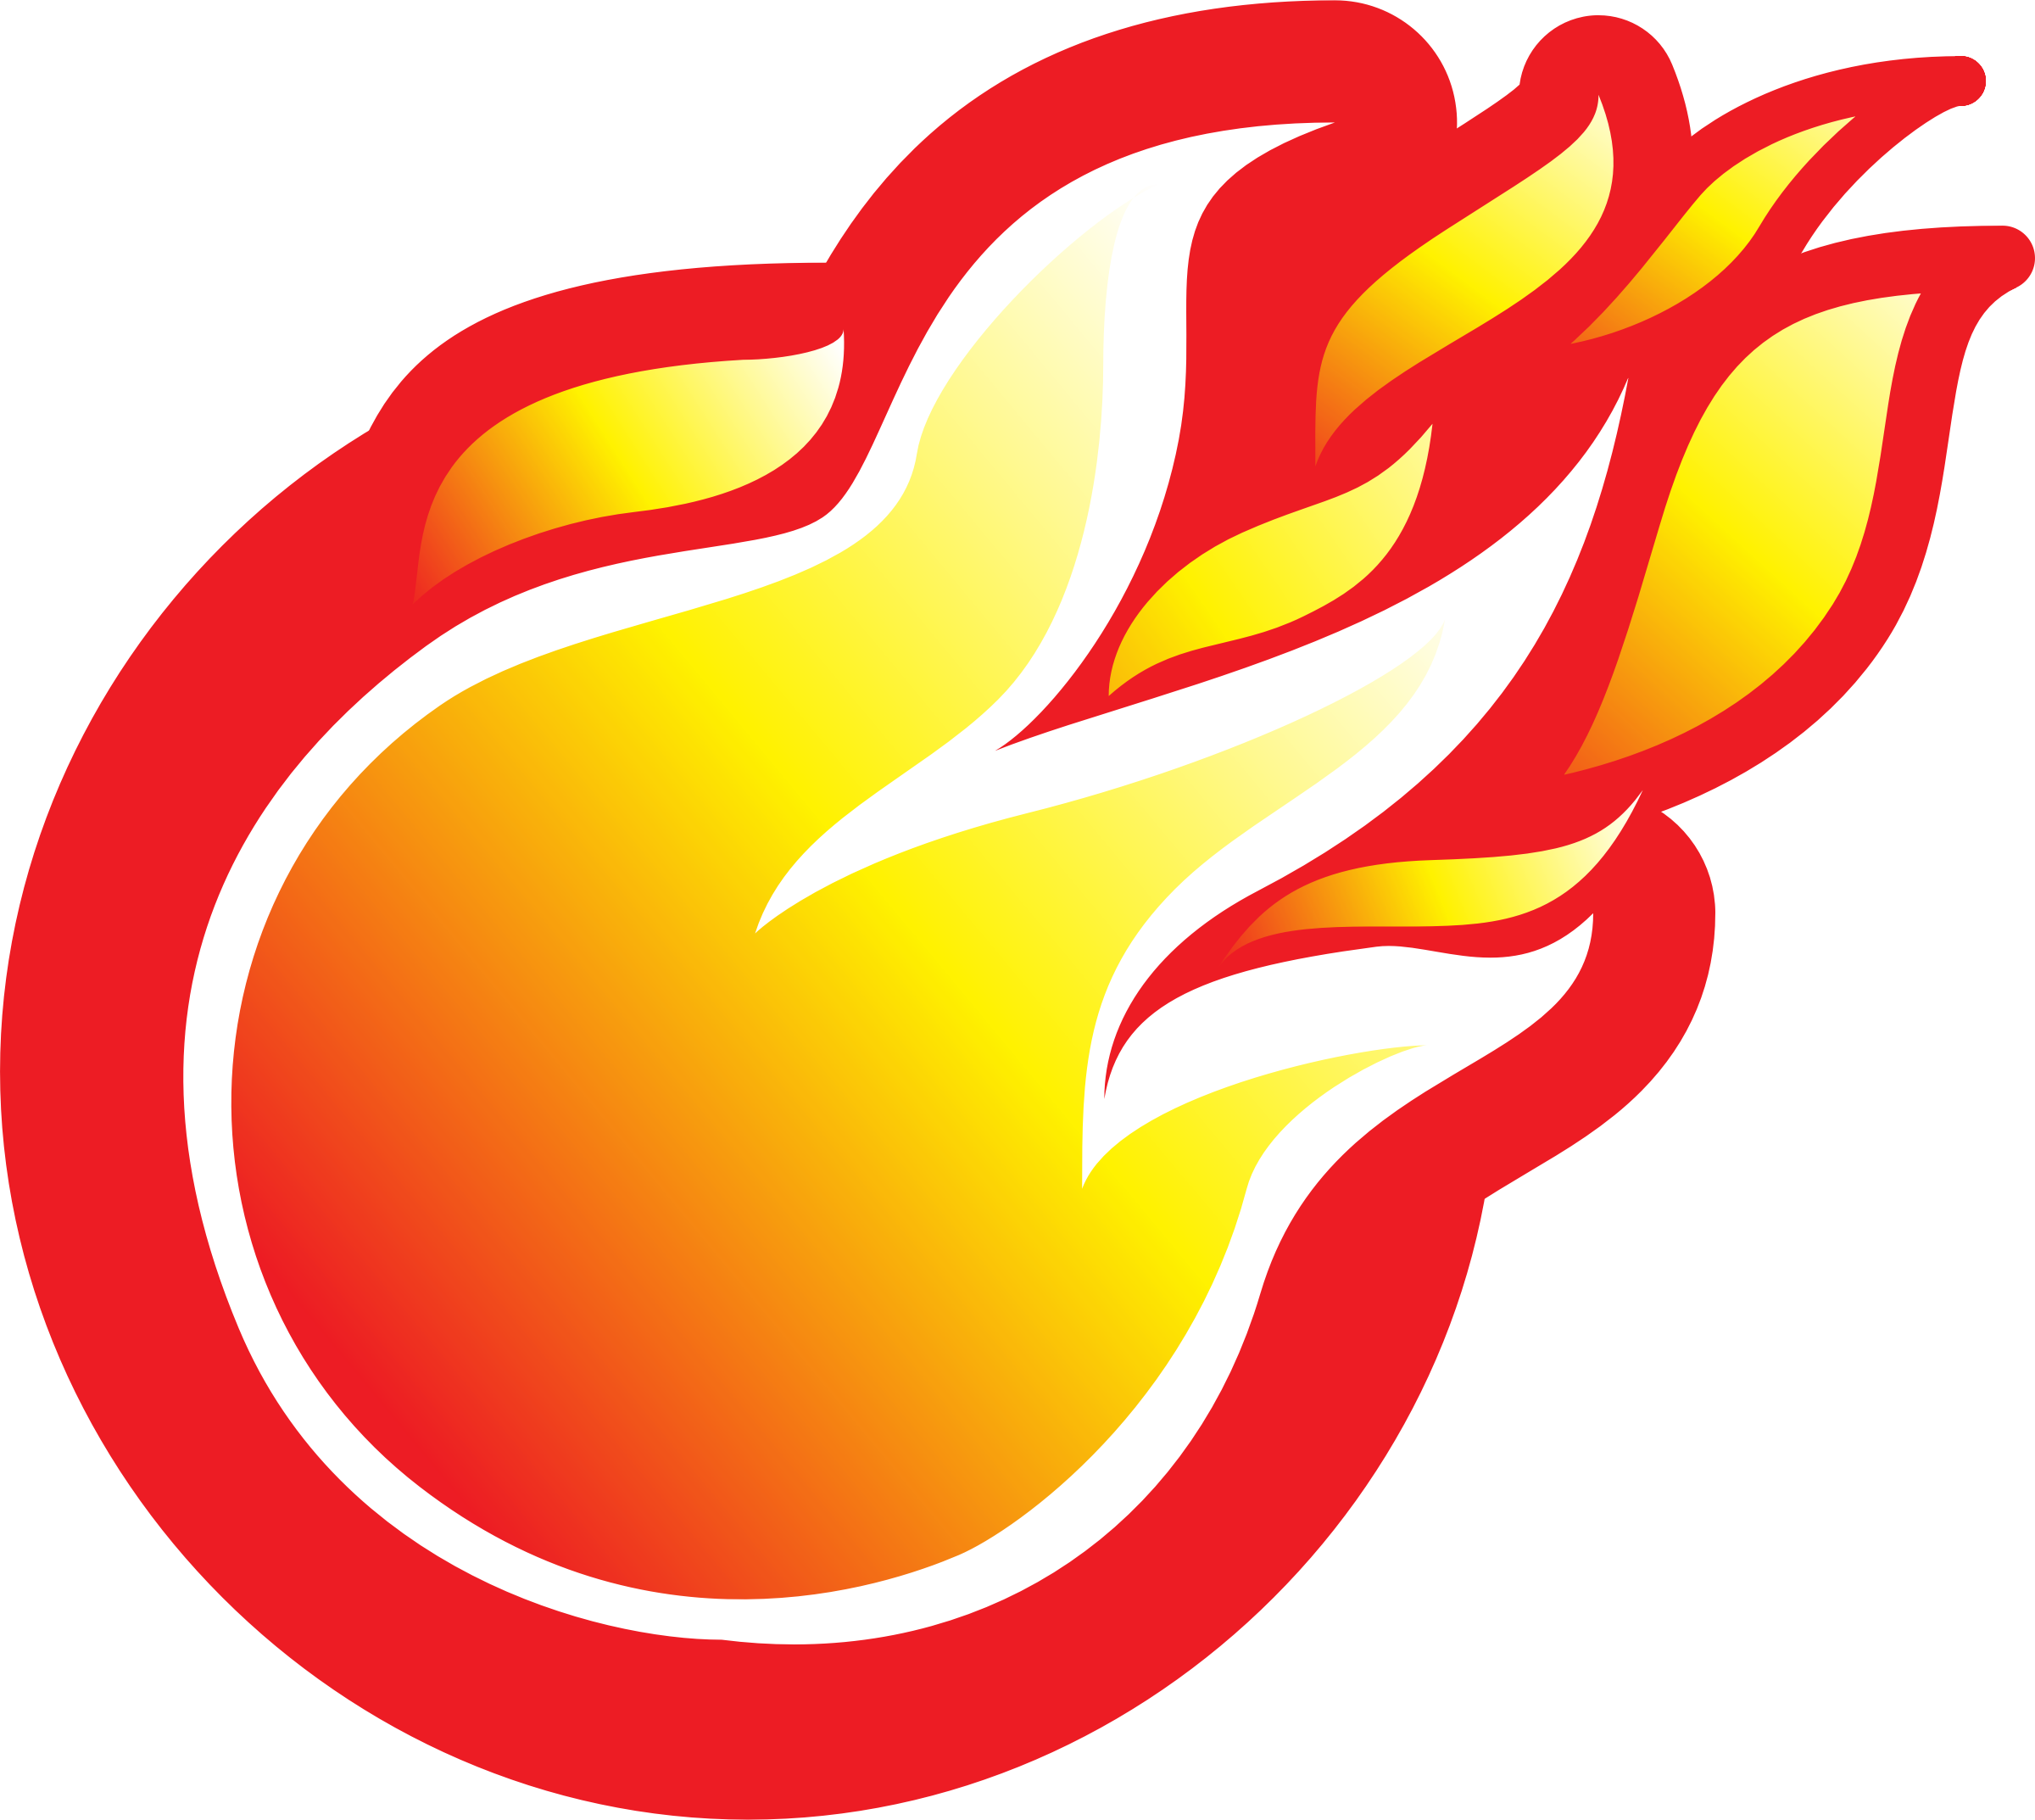 Flame clipart #1, Download drawings